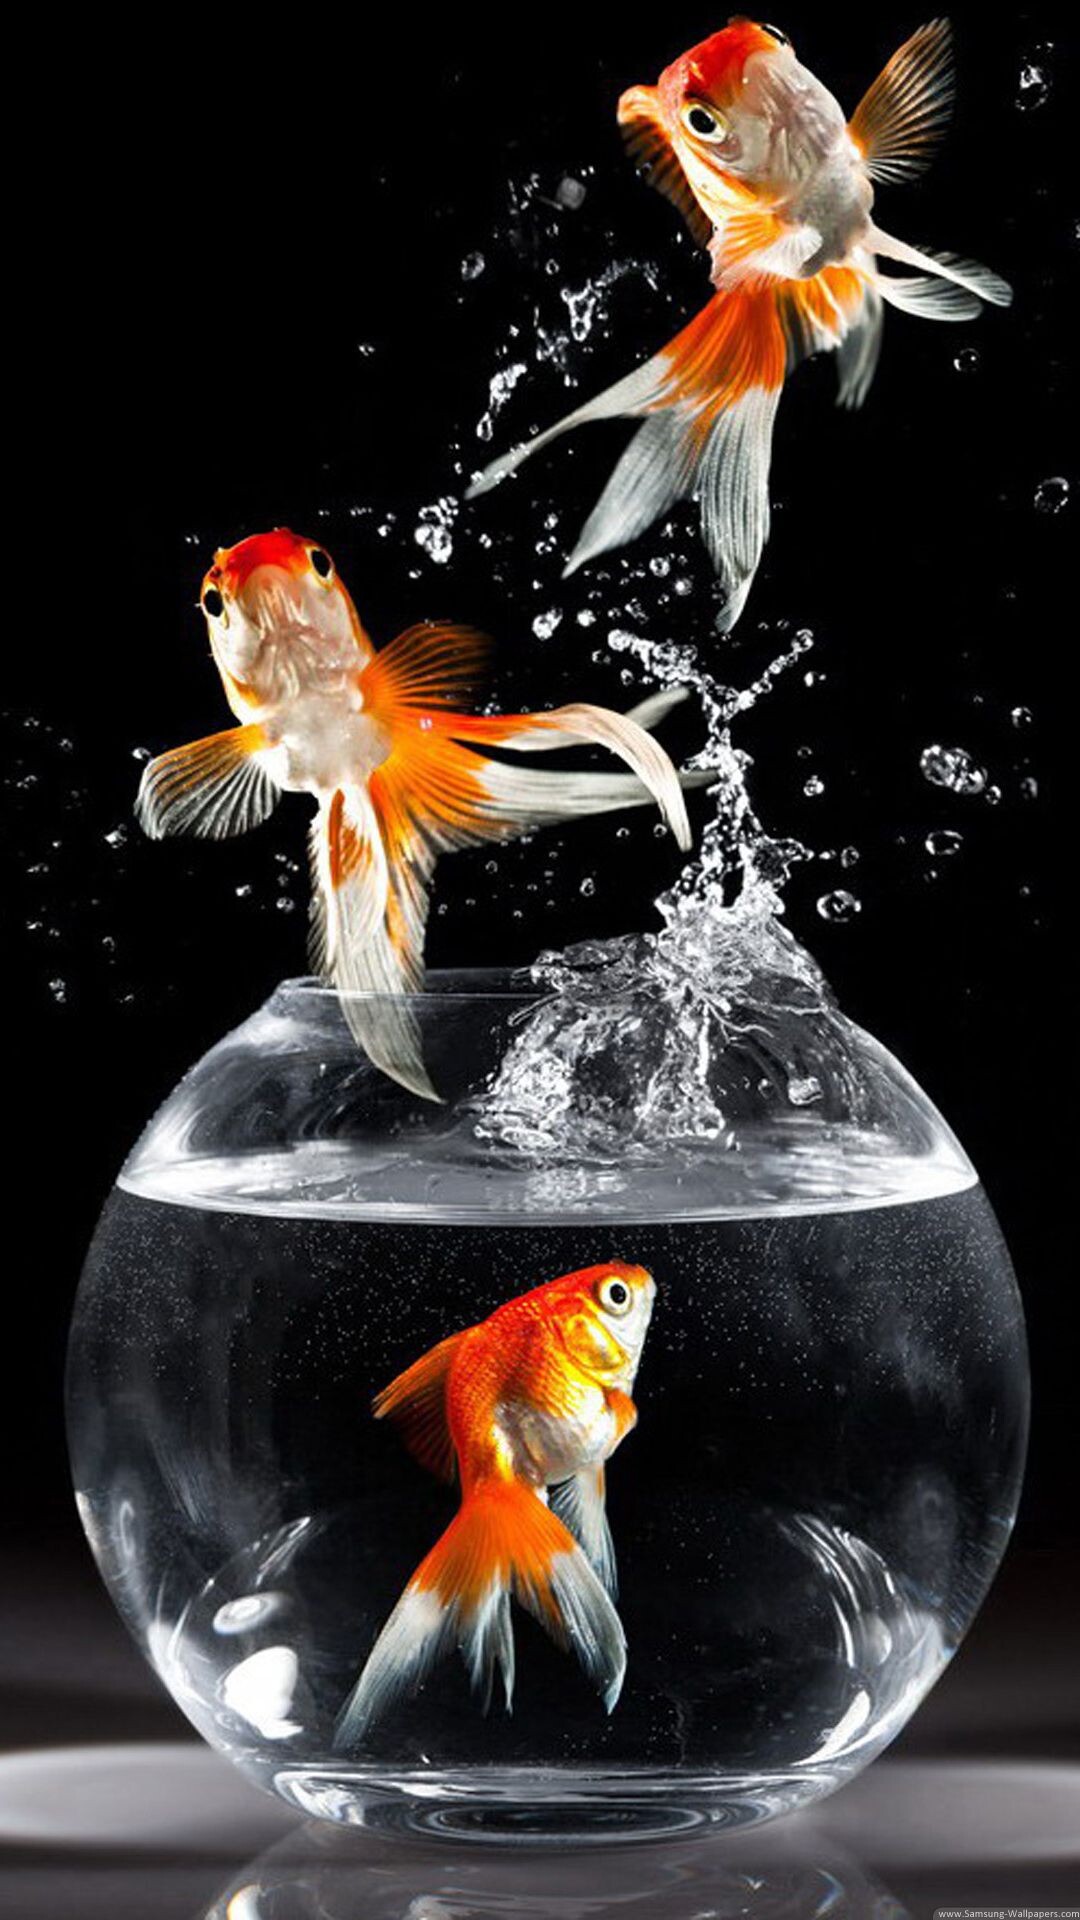 Gold Fish: Round bowl, Aquarium fish jumping out of the water, Flapping and splashing. 1080x1920 Full HD Wallpaper.